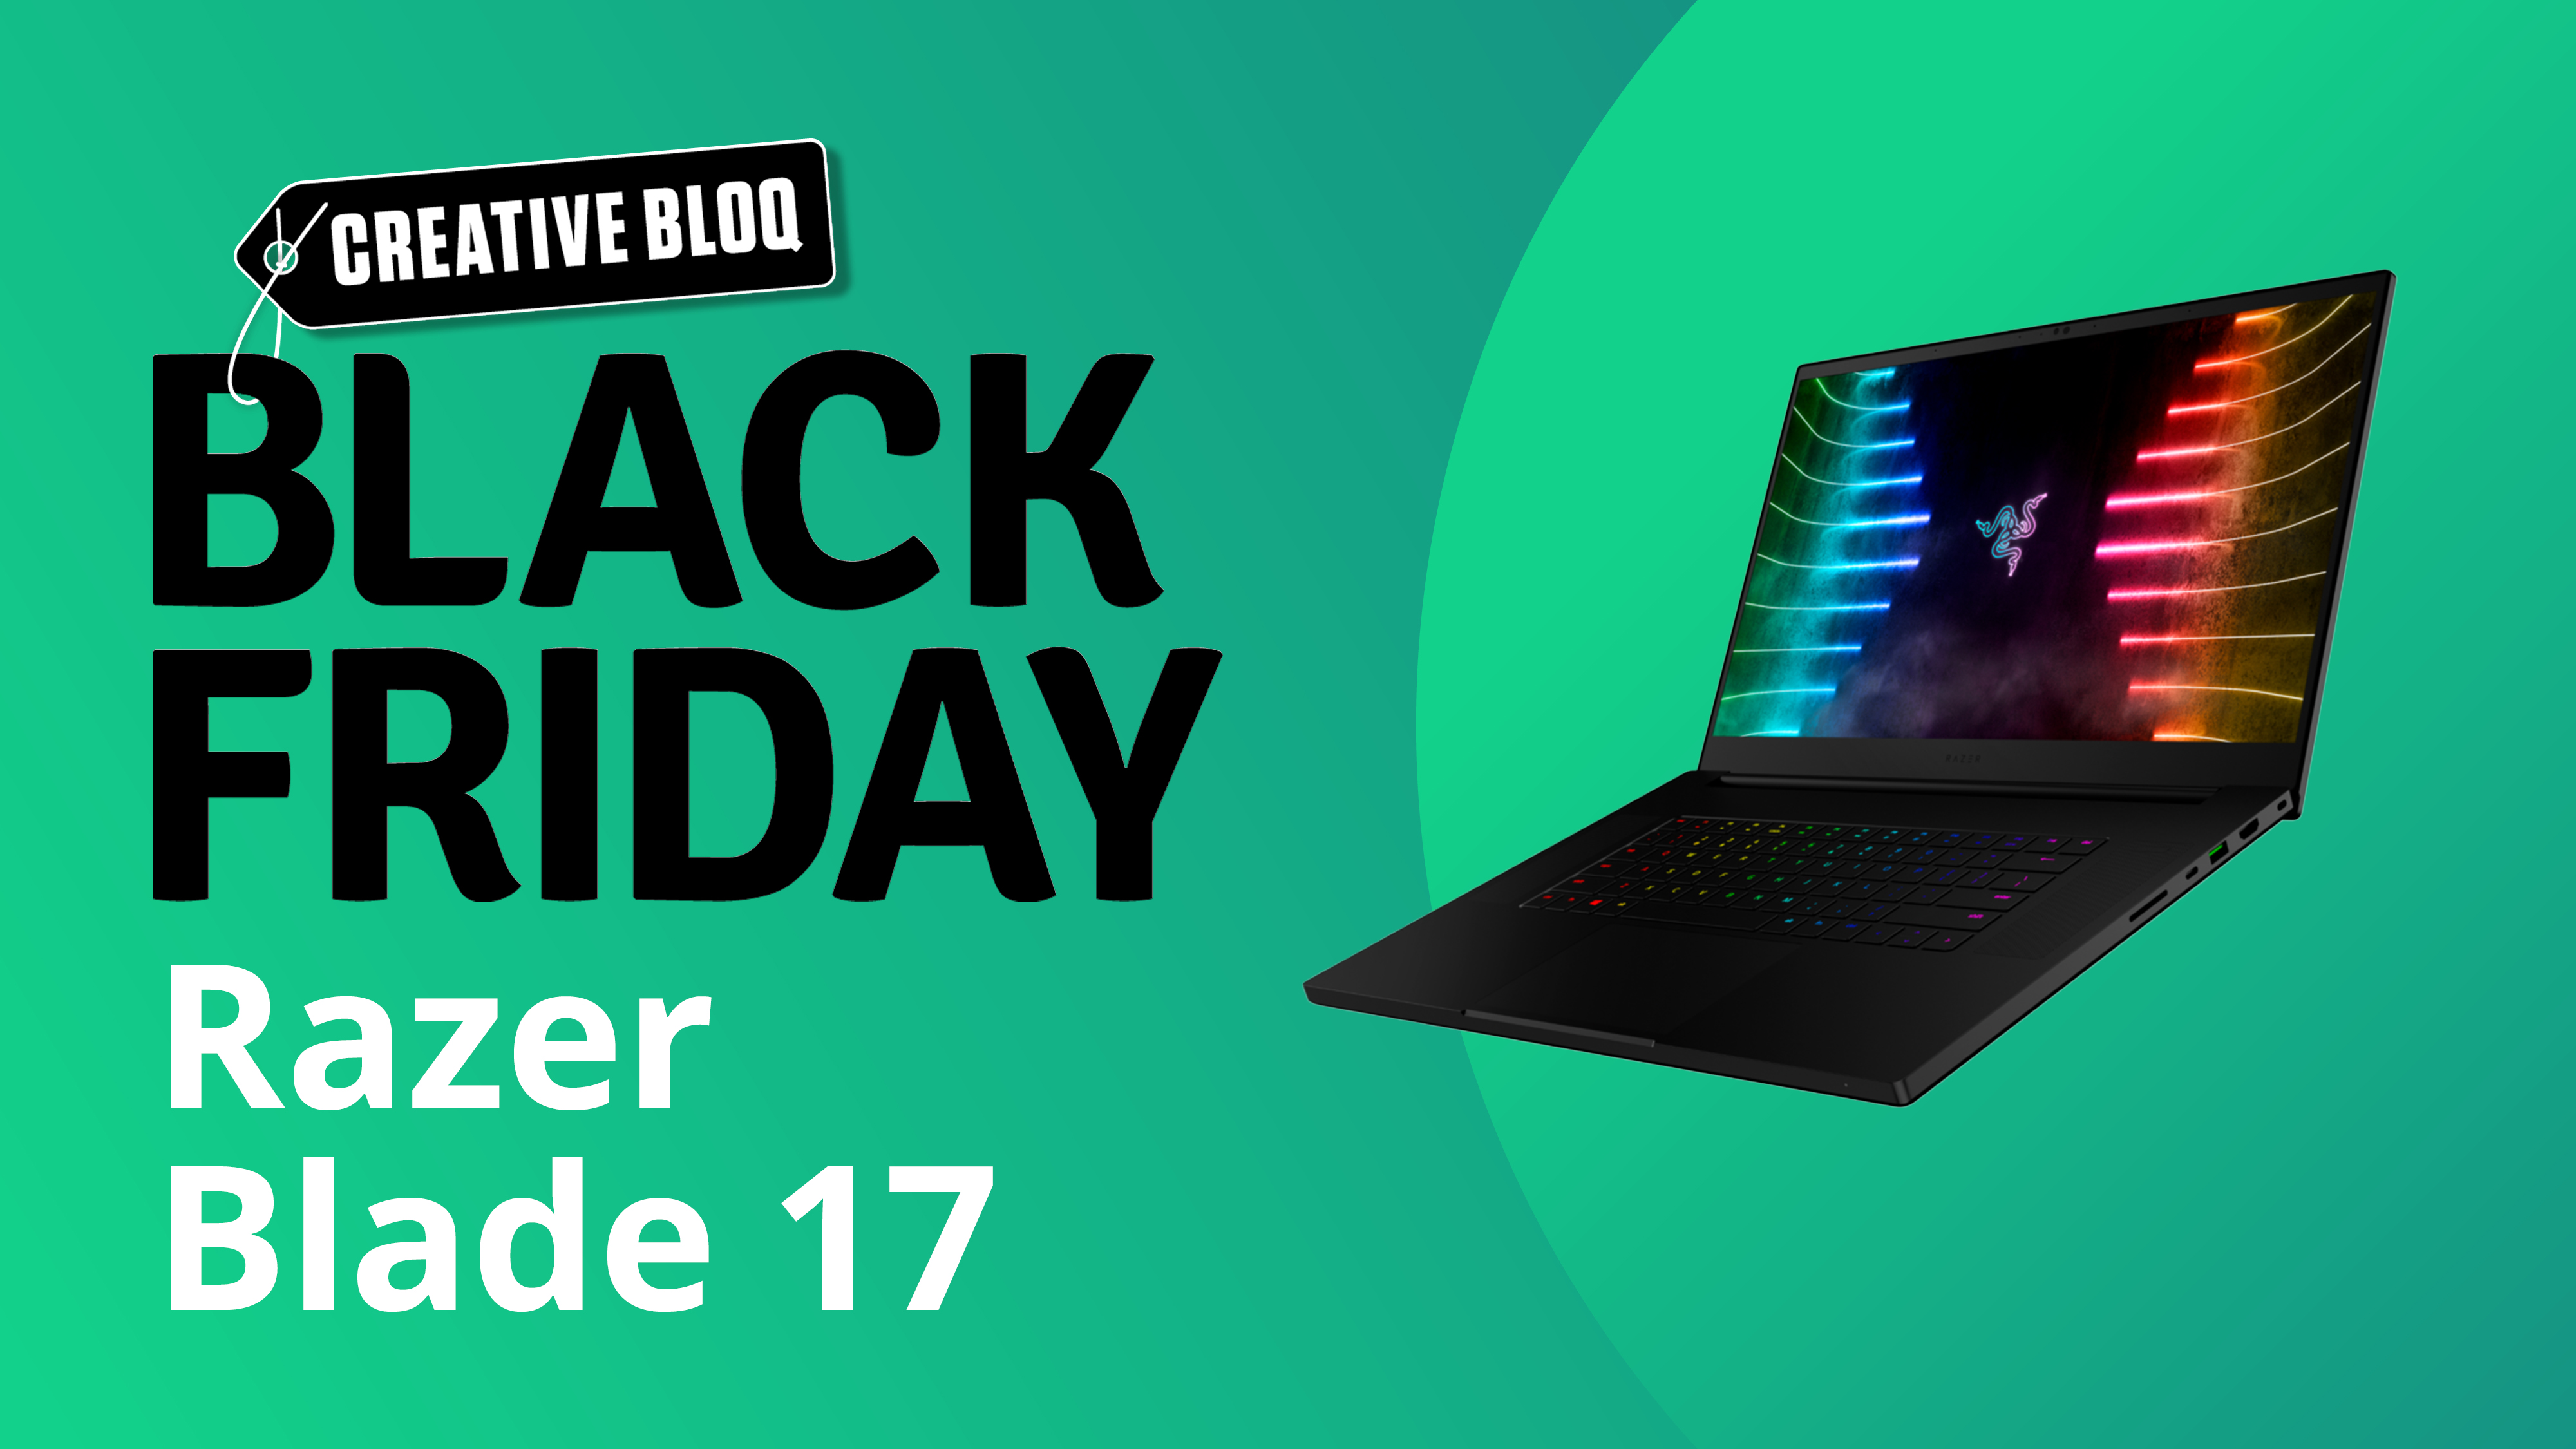 Razer Black Friday deal with an image of the Razer Blade 17 against a green background